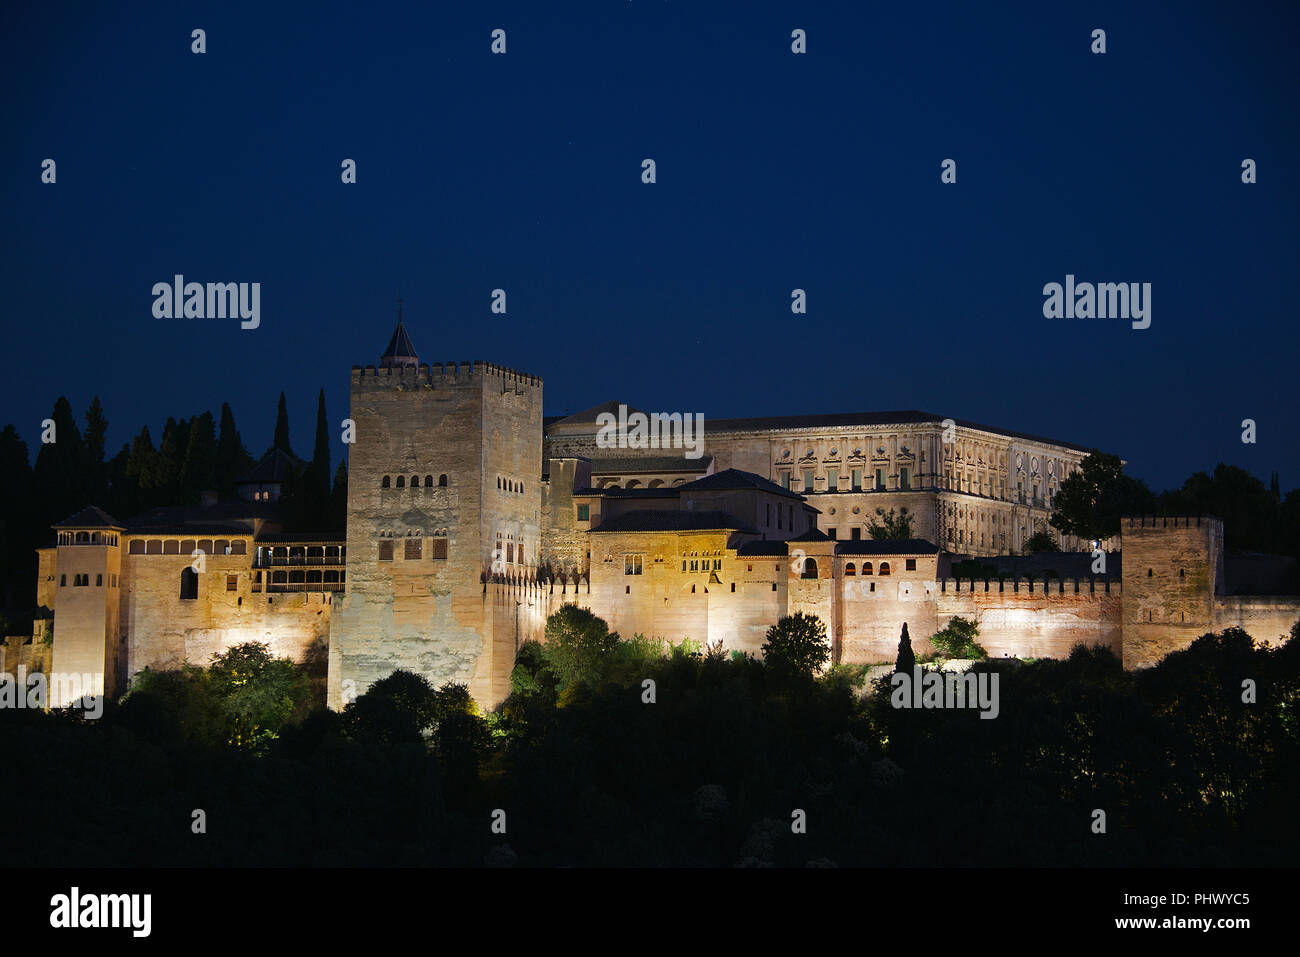 The Alhambra with the Torres de Comares and Nasrid Palaces lit at night  Granada Andalucia Spain Stock Photo - Alamy